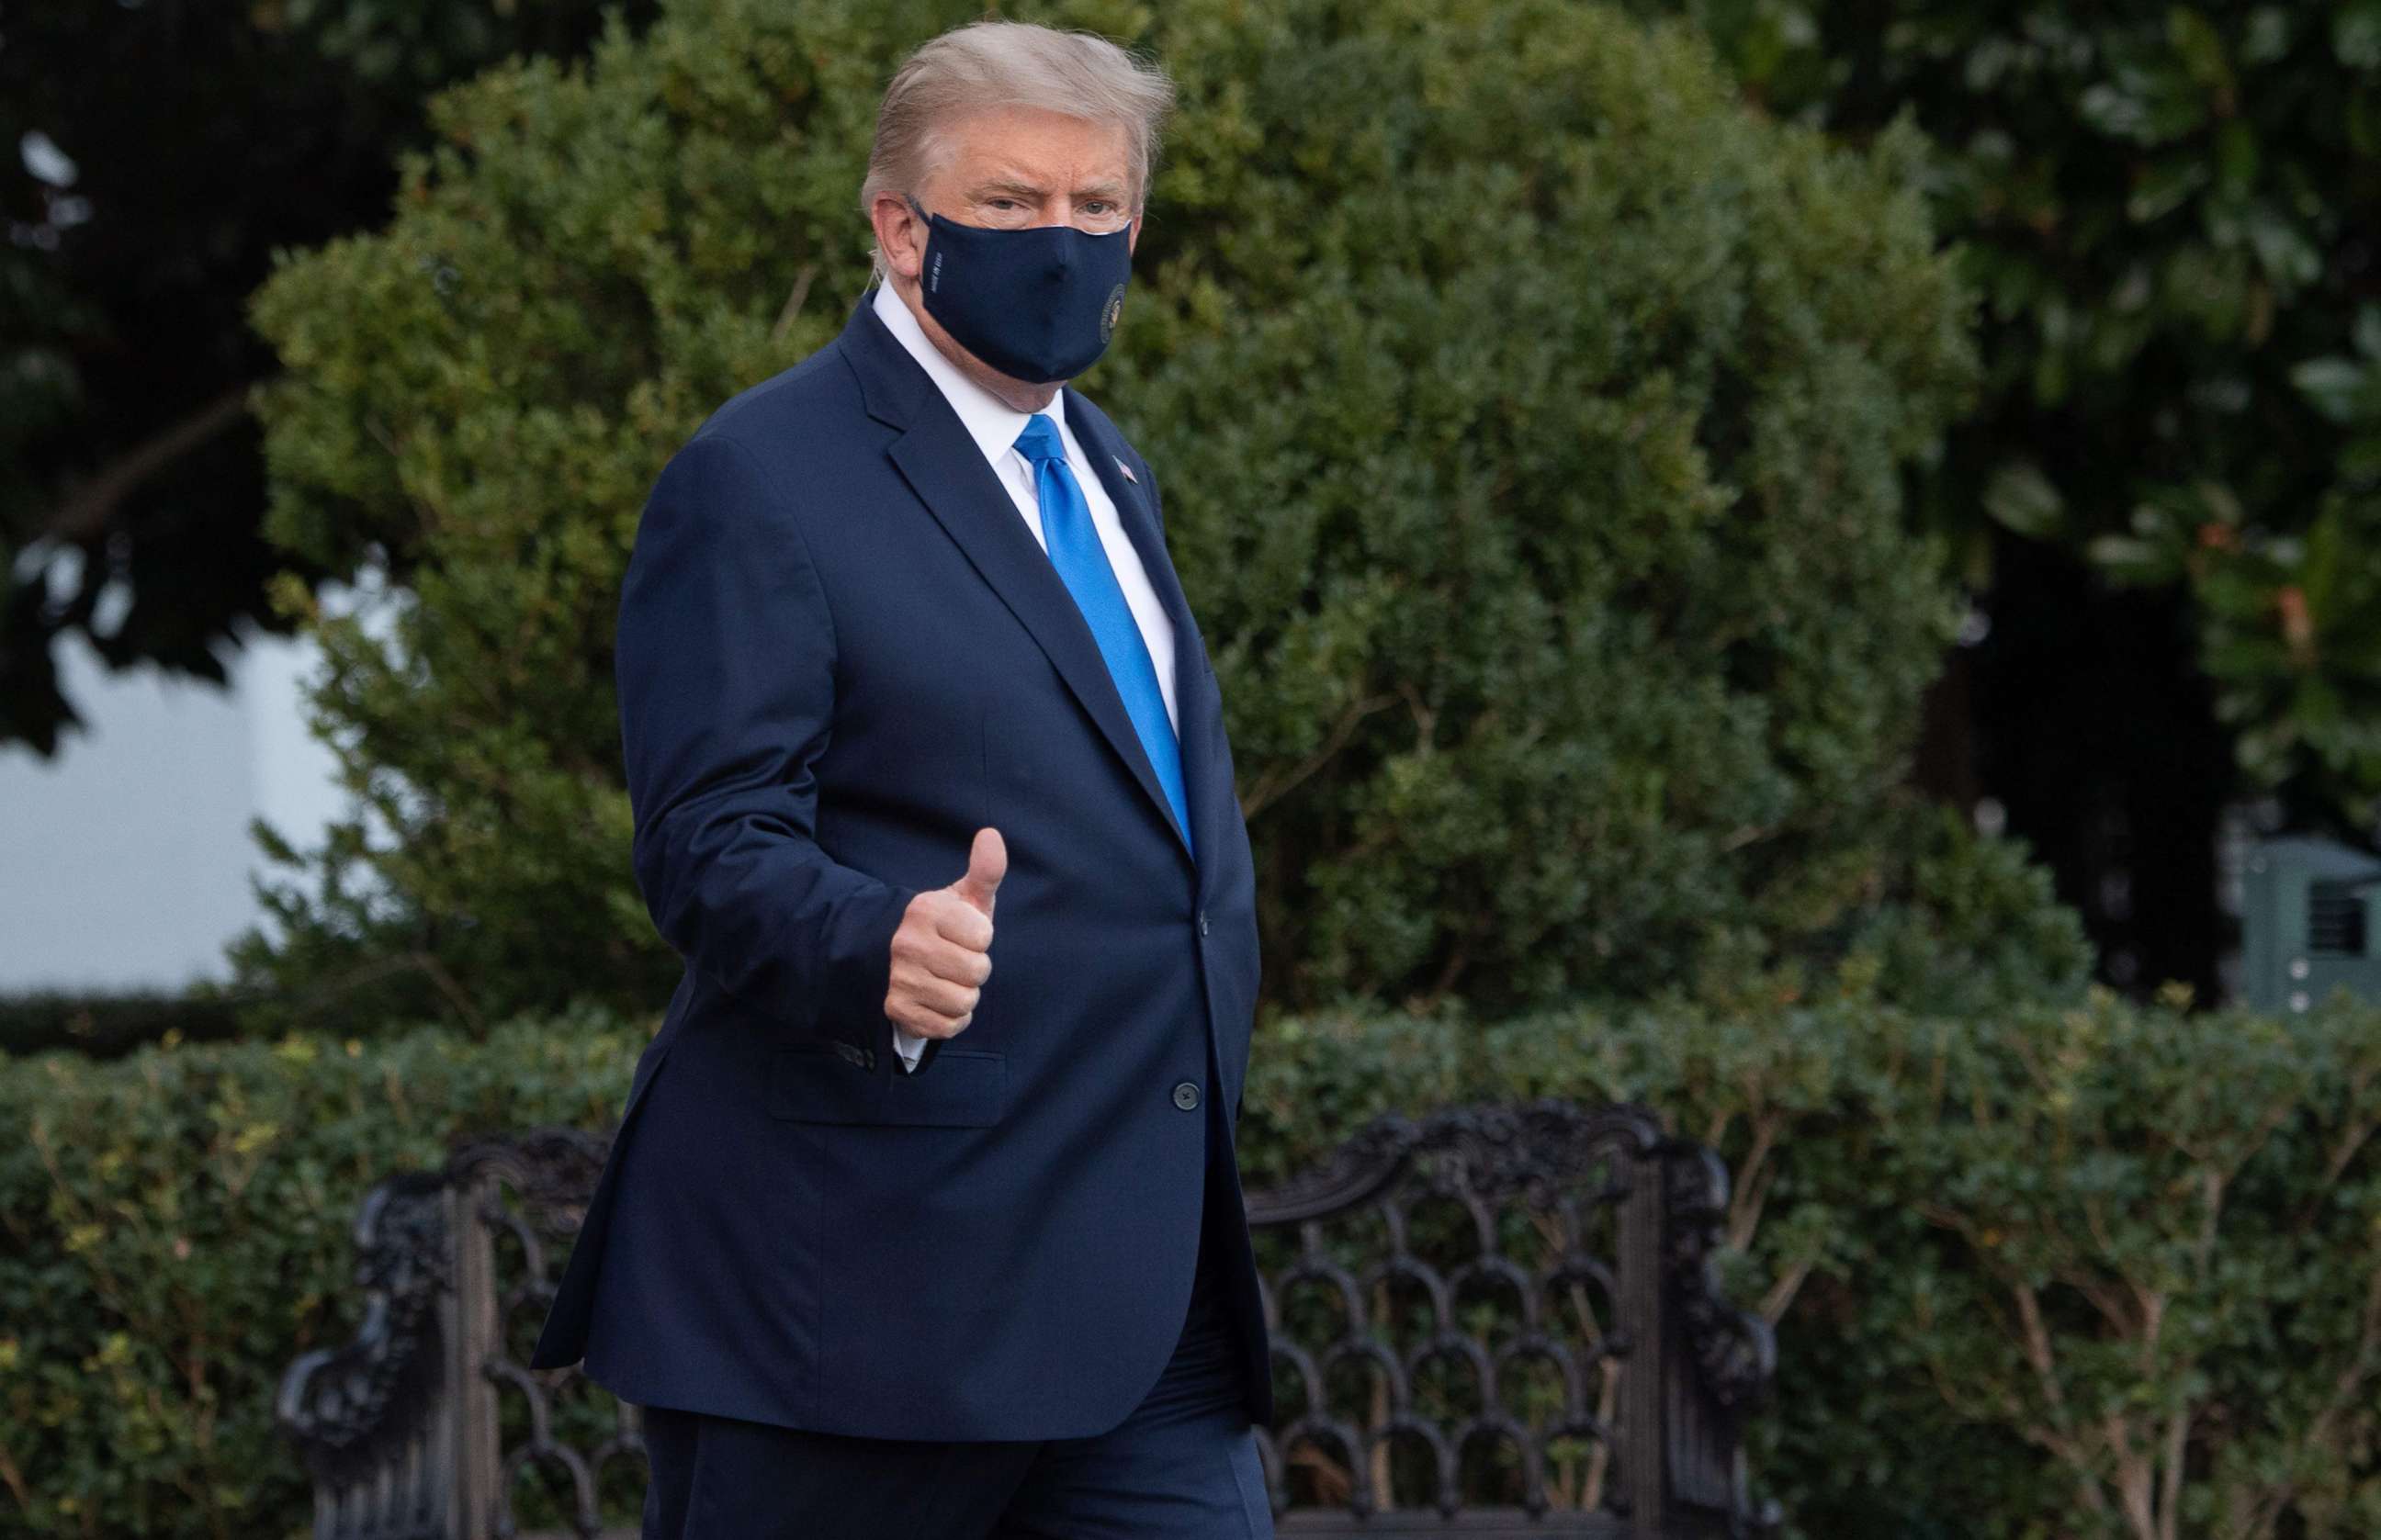 PHOTO: President Donald Trump walks to Marine One prior to departure from the South Lawn of the White House, Oct. 2, 2020, as he heads to Walter Reed Military Medical Center, after testing positive for COVID-19.